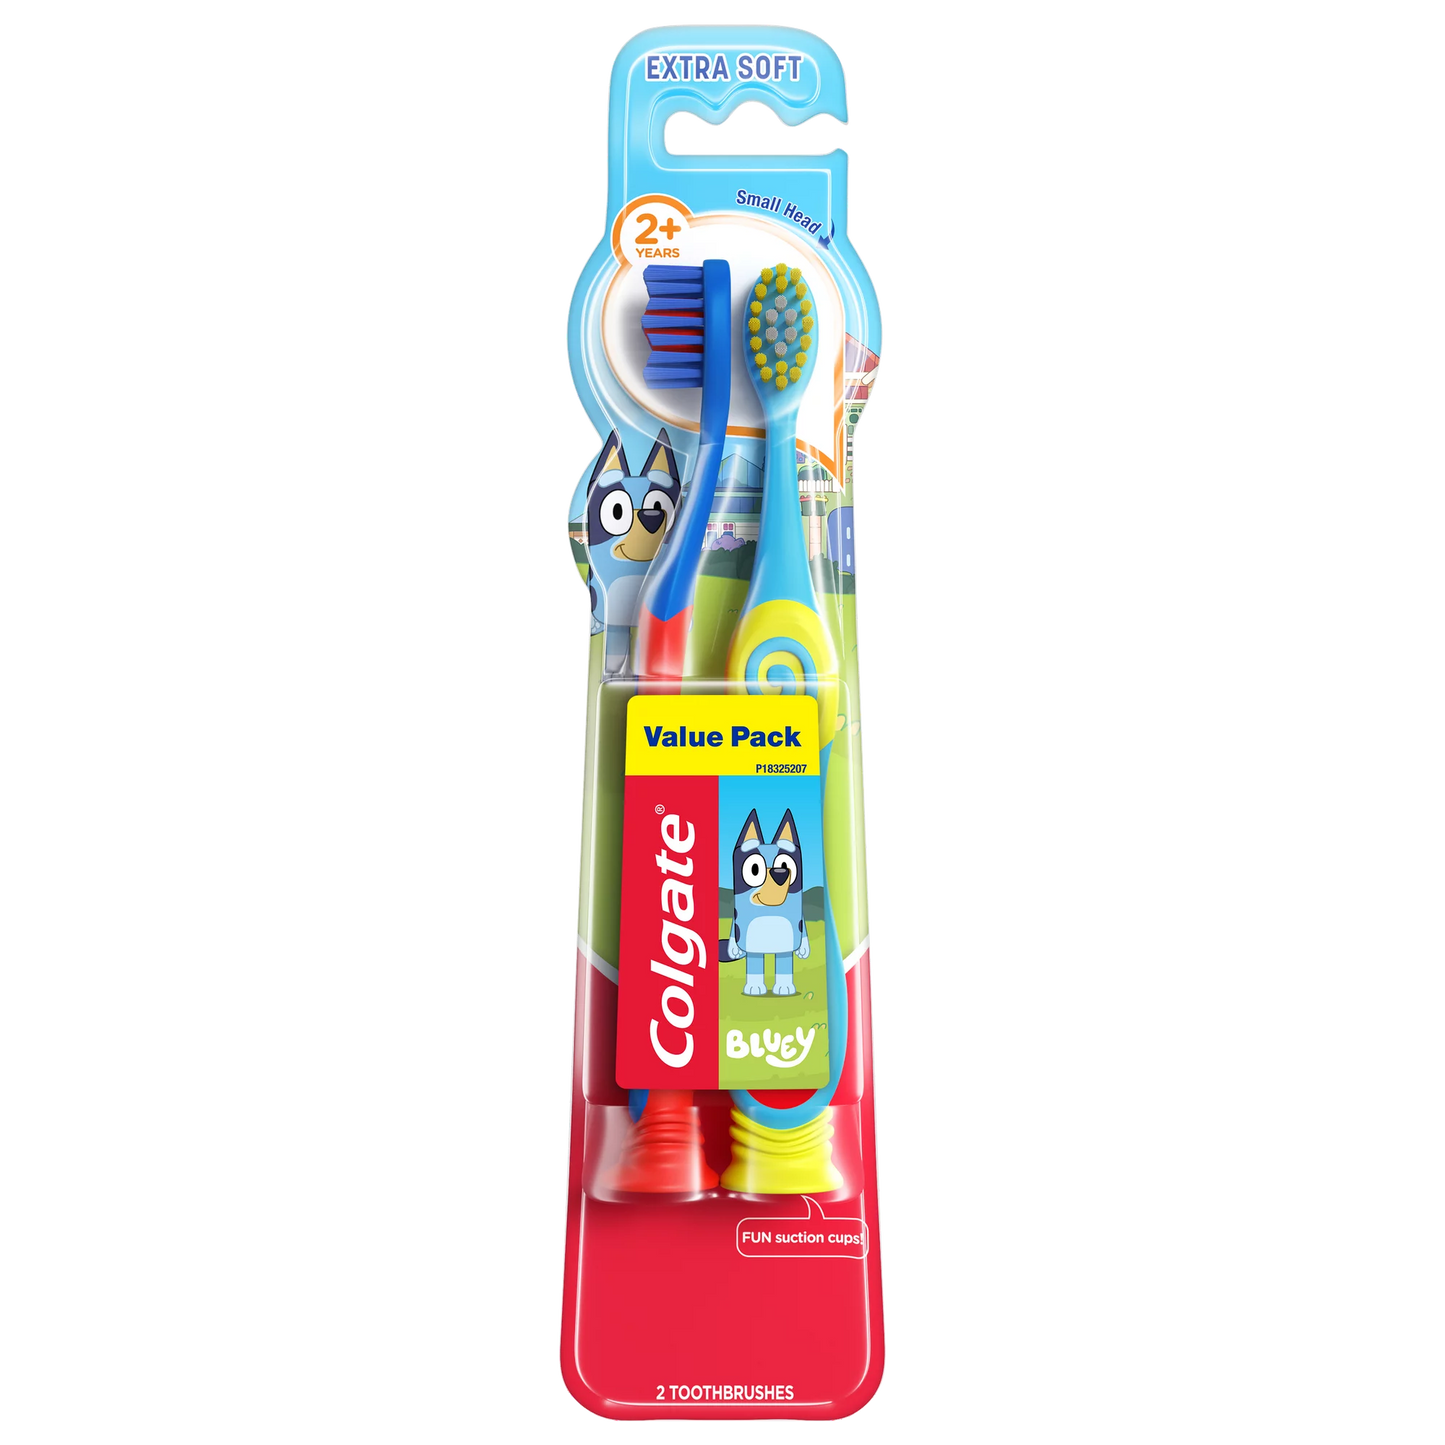 Colgate Kids Toothbrush with Extra Soft Bristles and Suction Cup Bluey, 2 pk